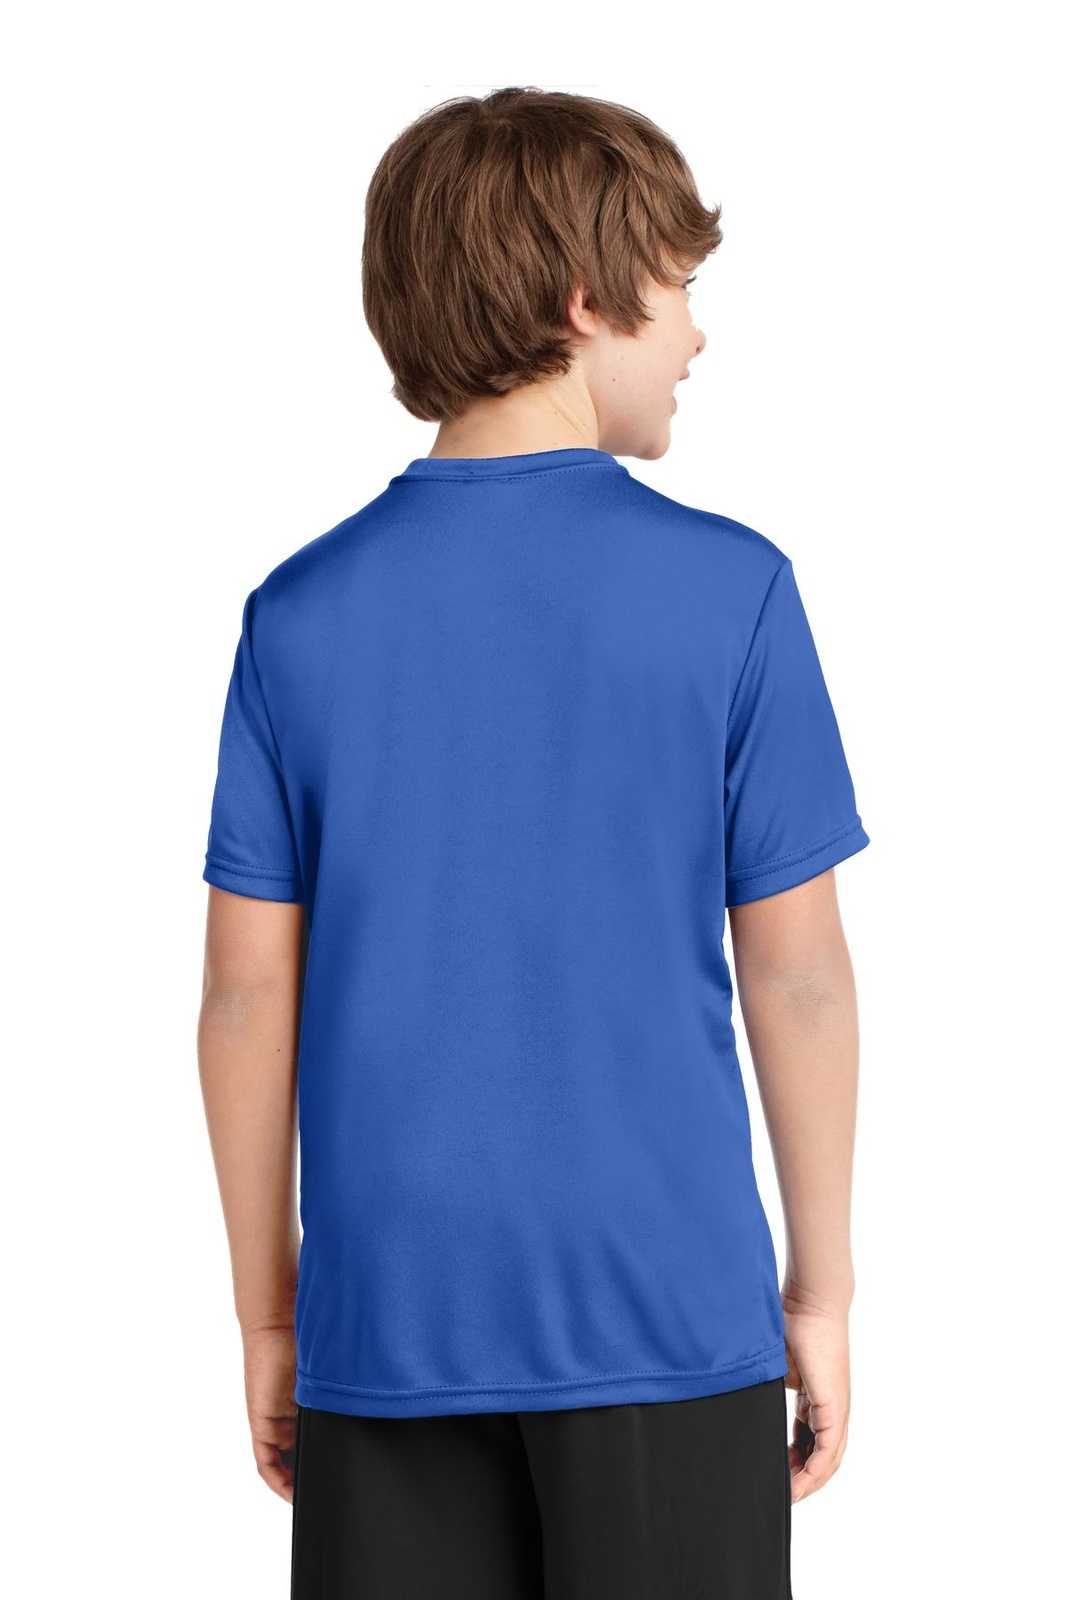 Port & Company PC380Y Youth Performance Tee - Royal - HIT a Double - 1